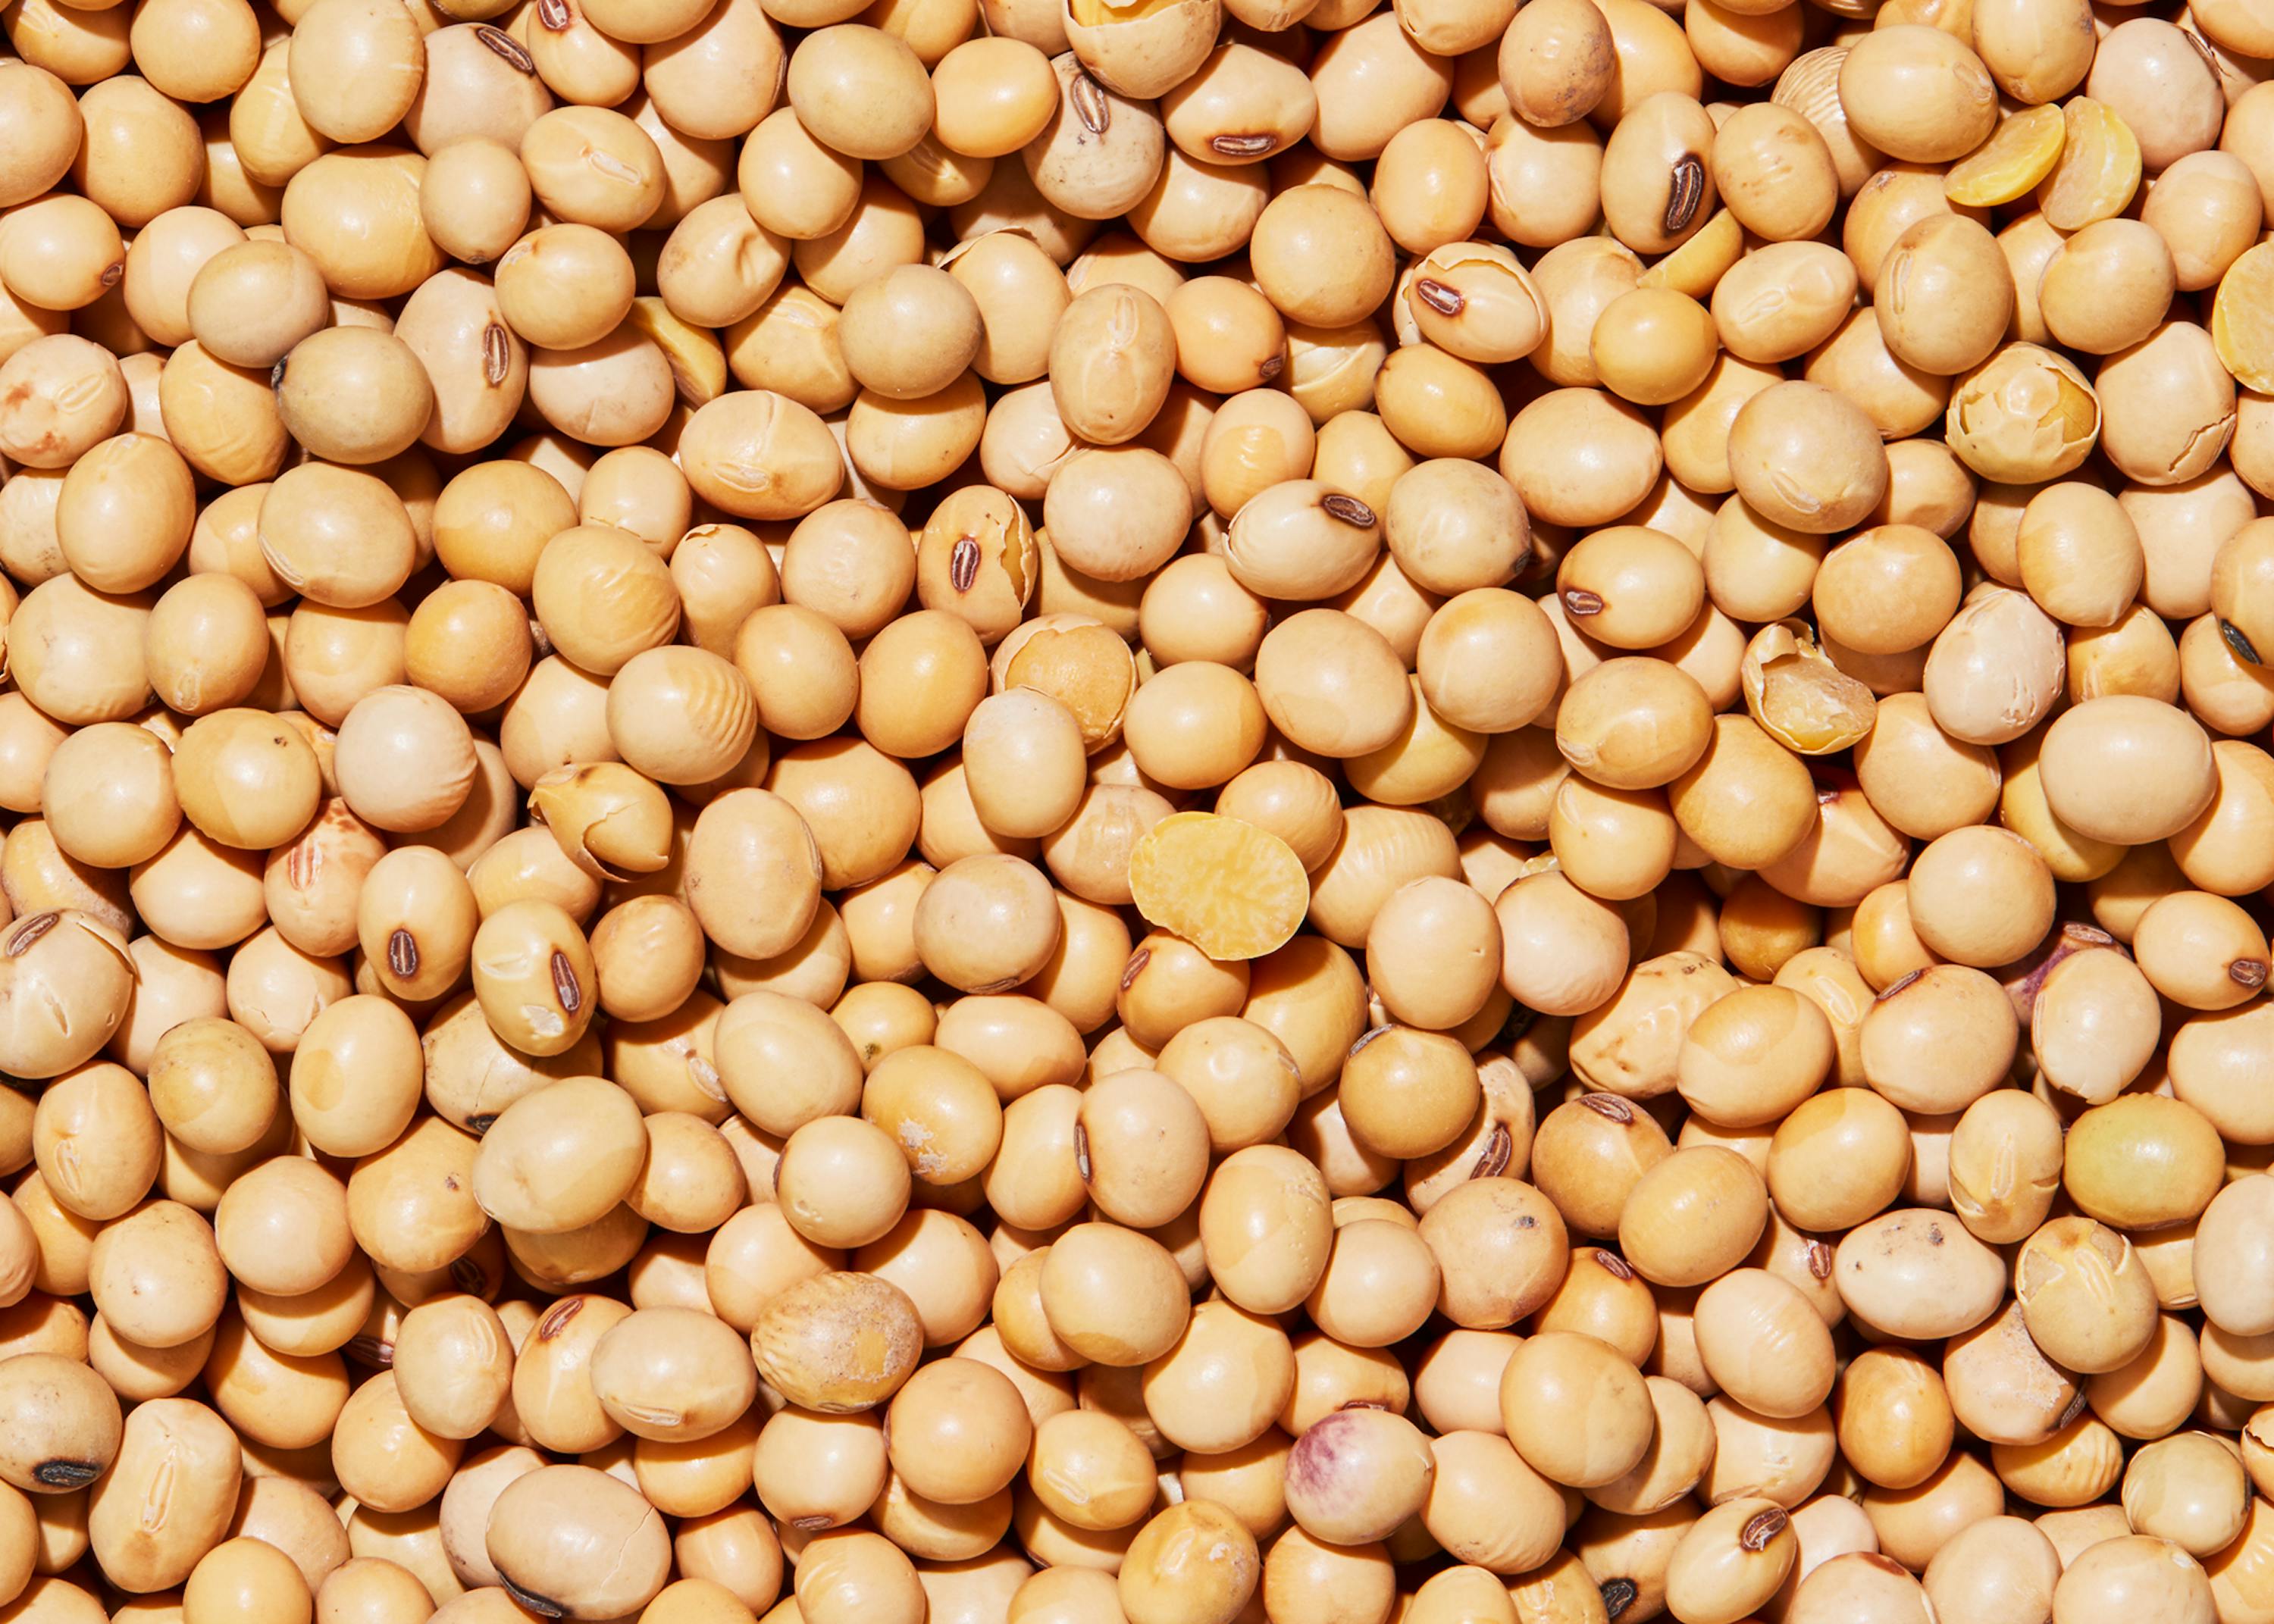 Facts and myths about soybeans